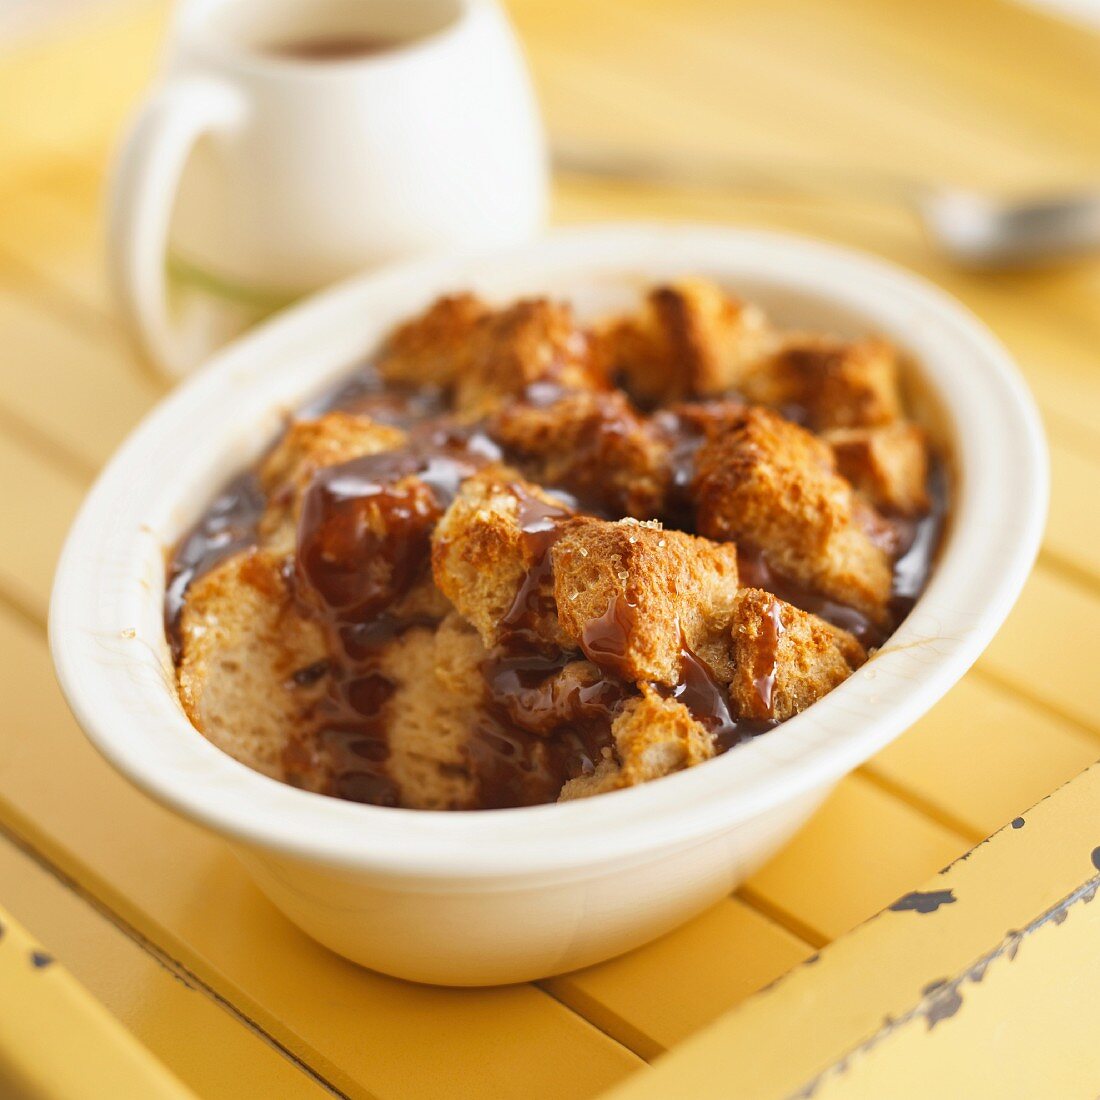 Bread and butter pudding with chocolate sauce